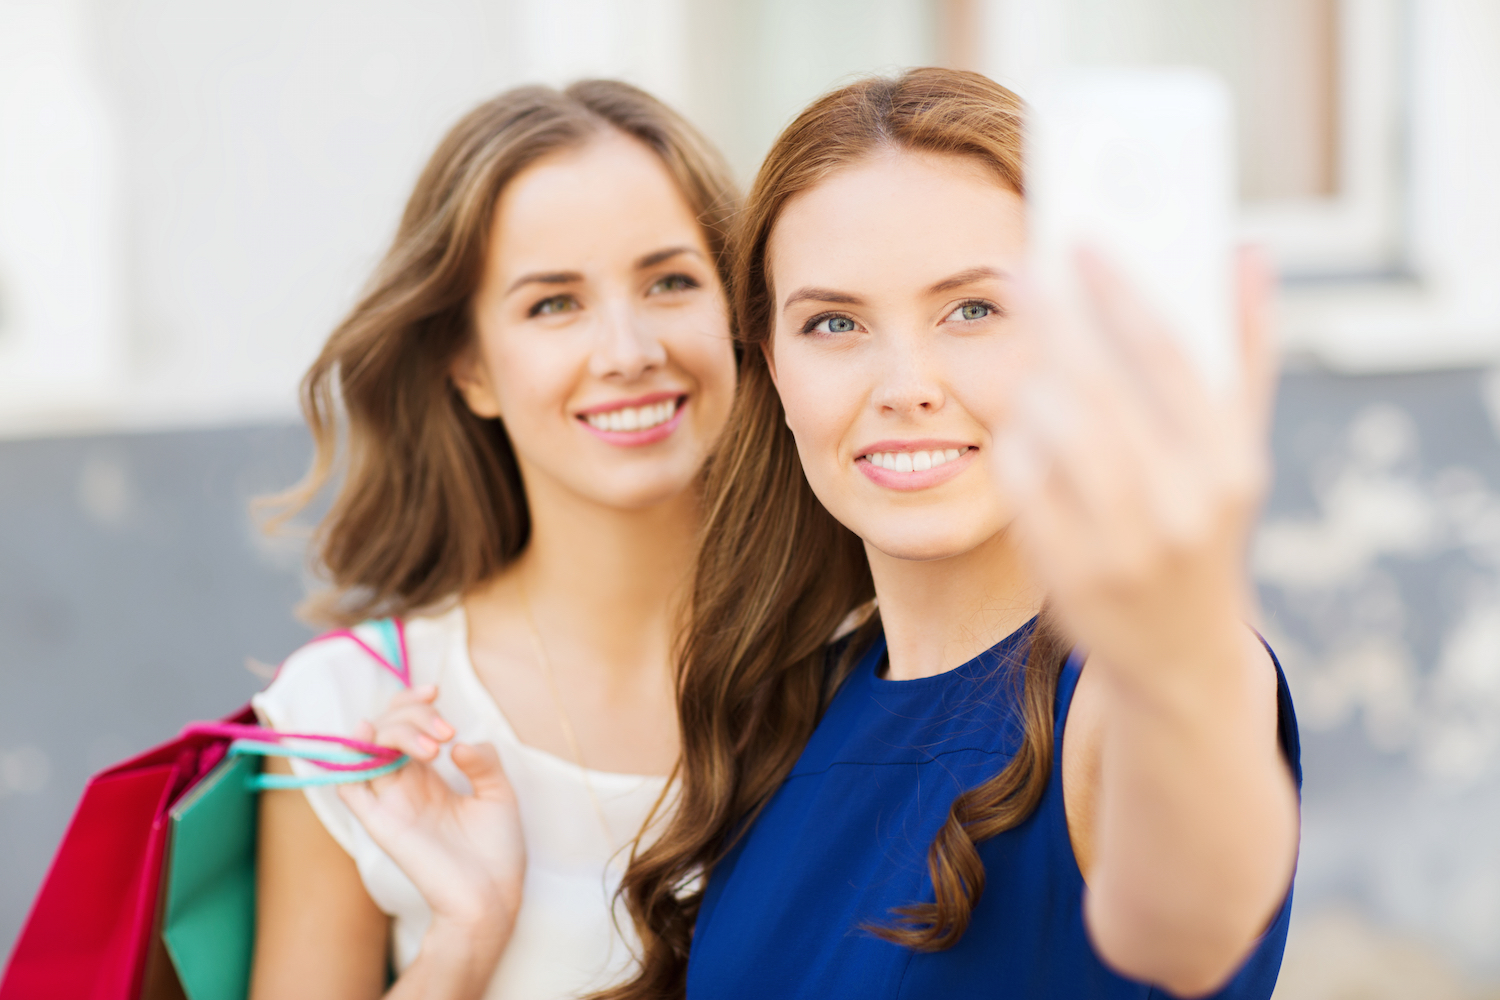 Could the Selfie Craze Have a Positive Impact on Oral Health?